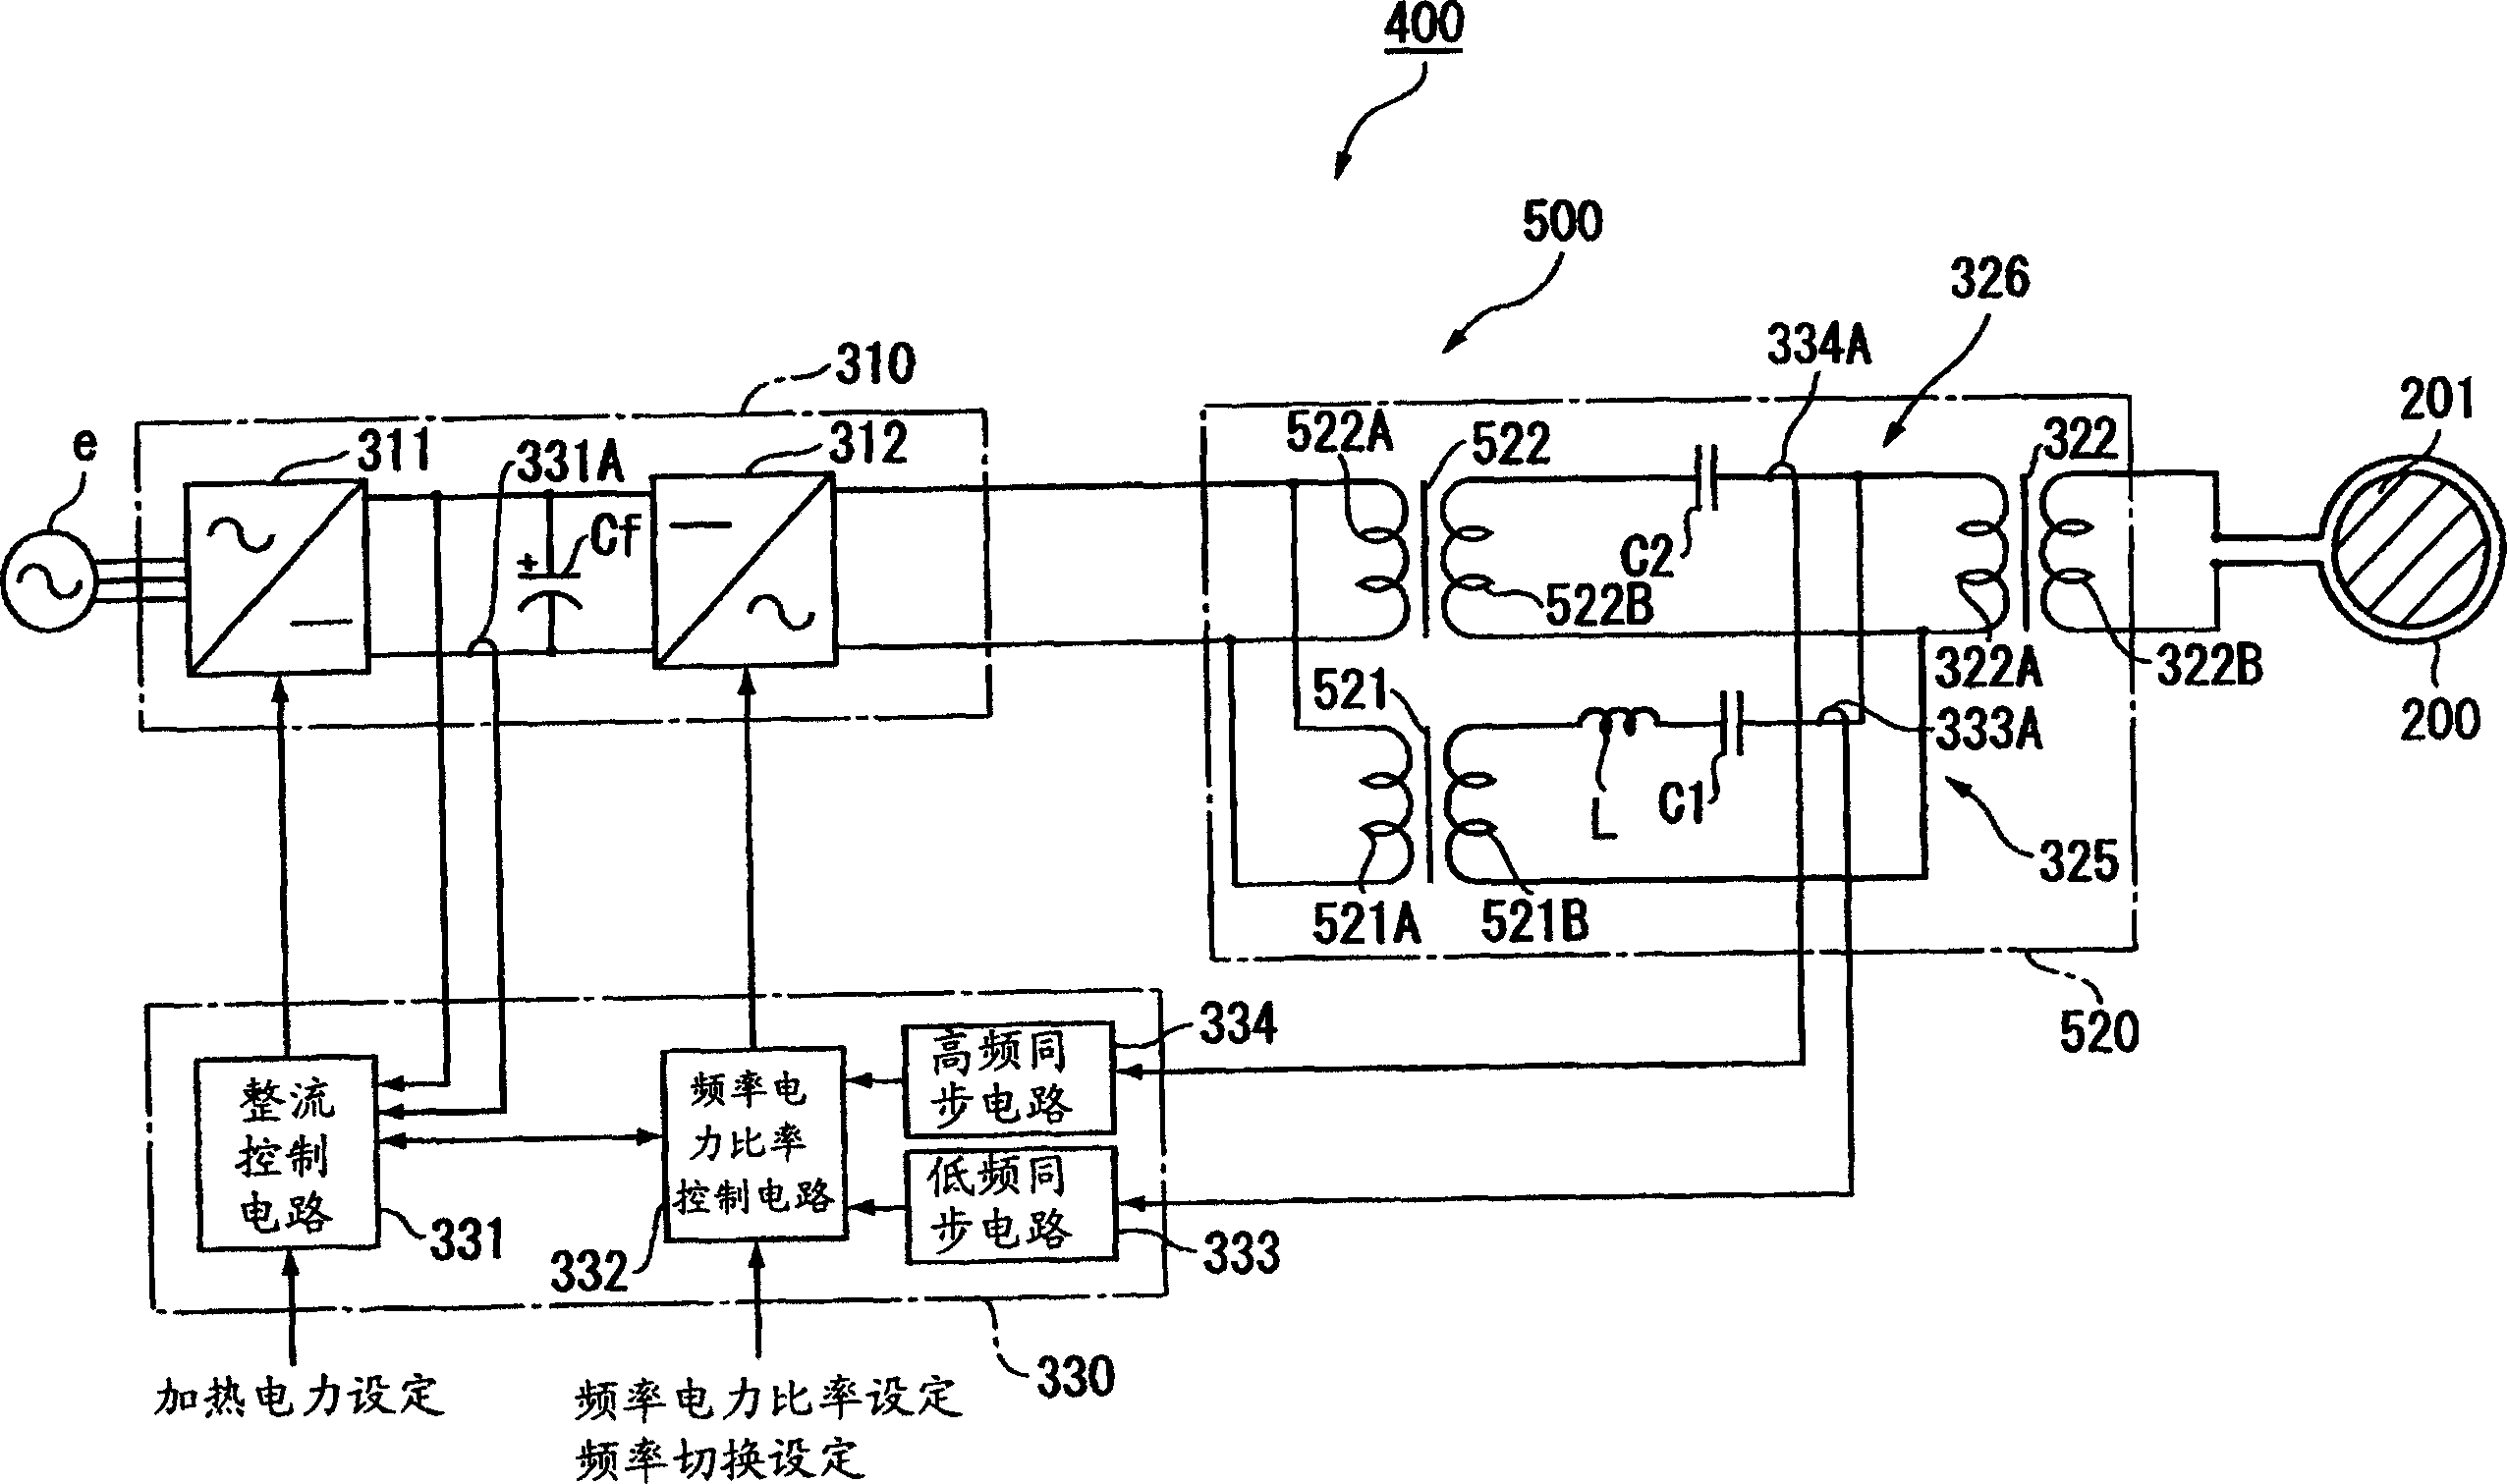 Power-feeding device and induction heating device